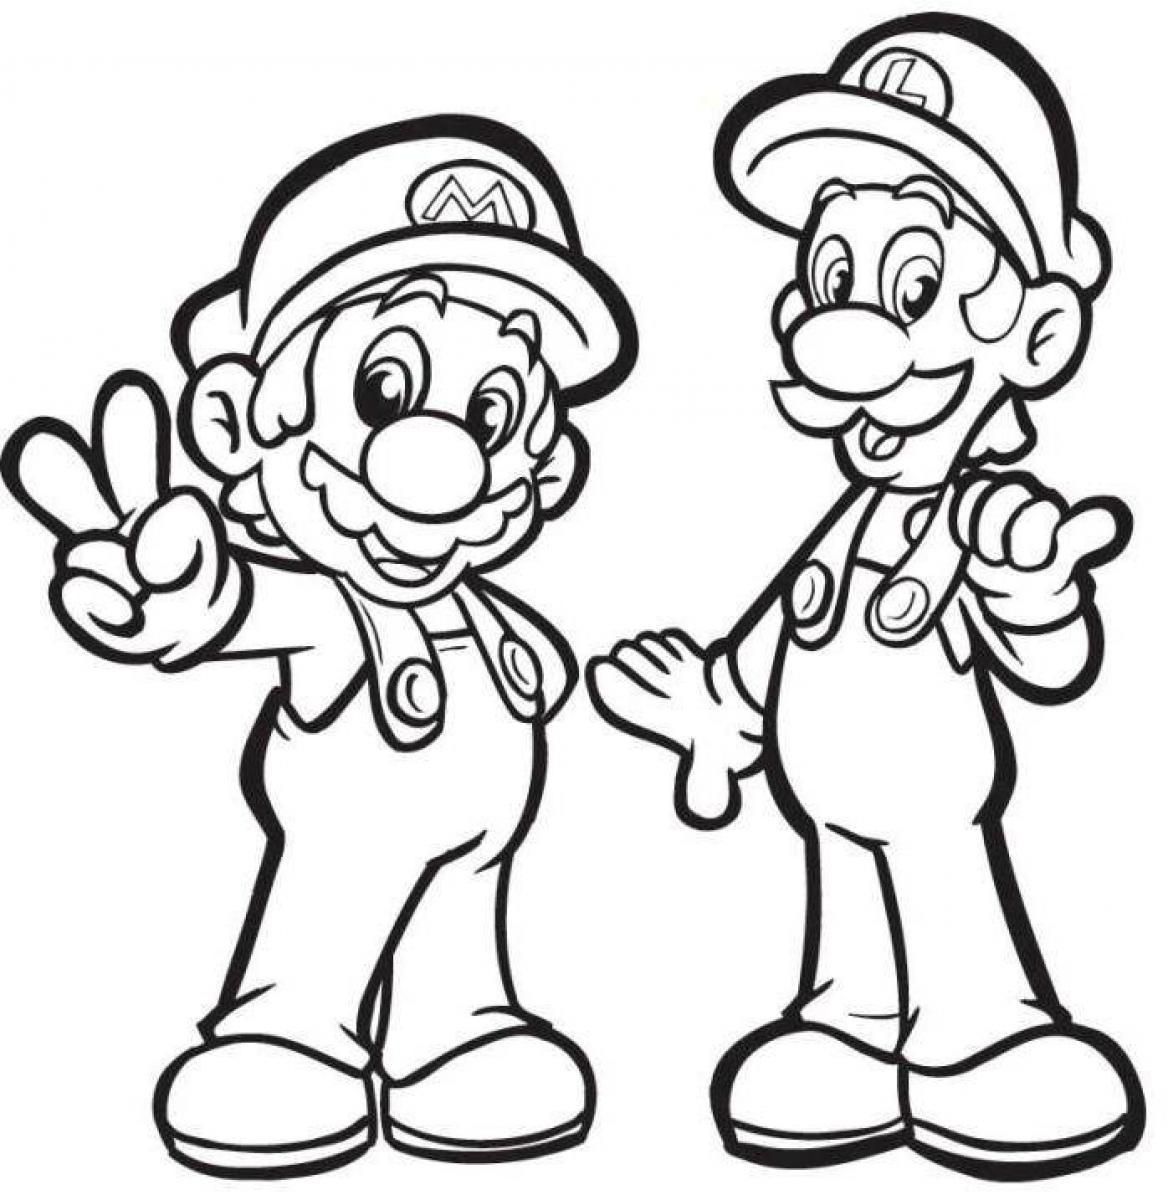 the-best-free-luigi-coloring-page-images-download-from-495-free